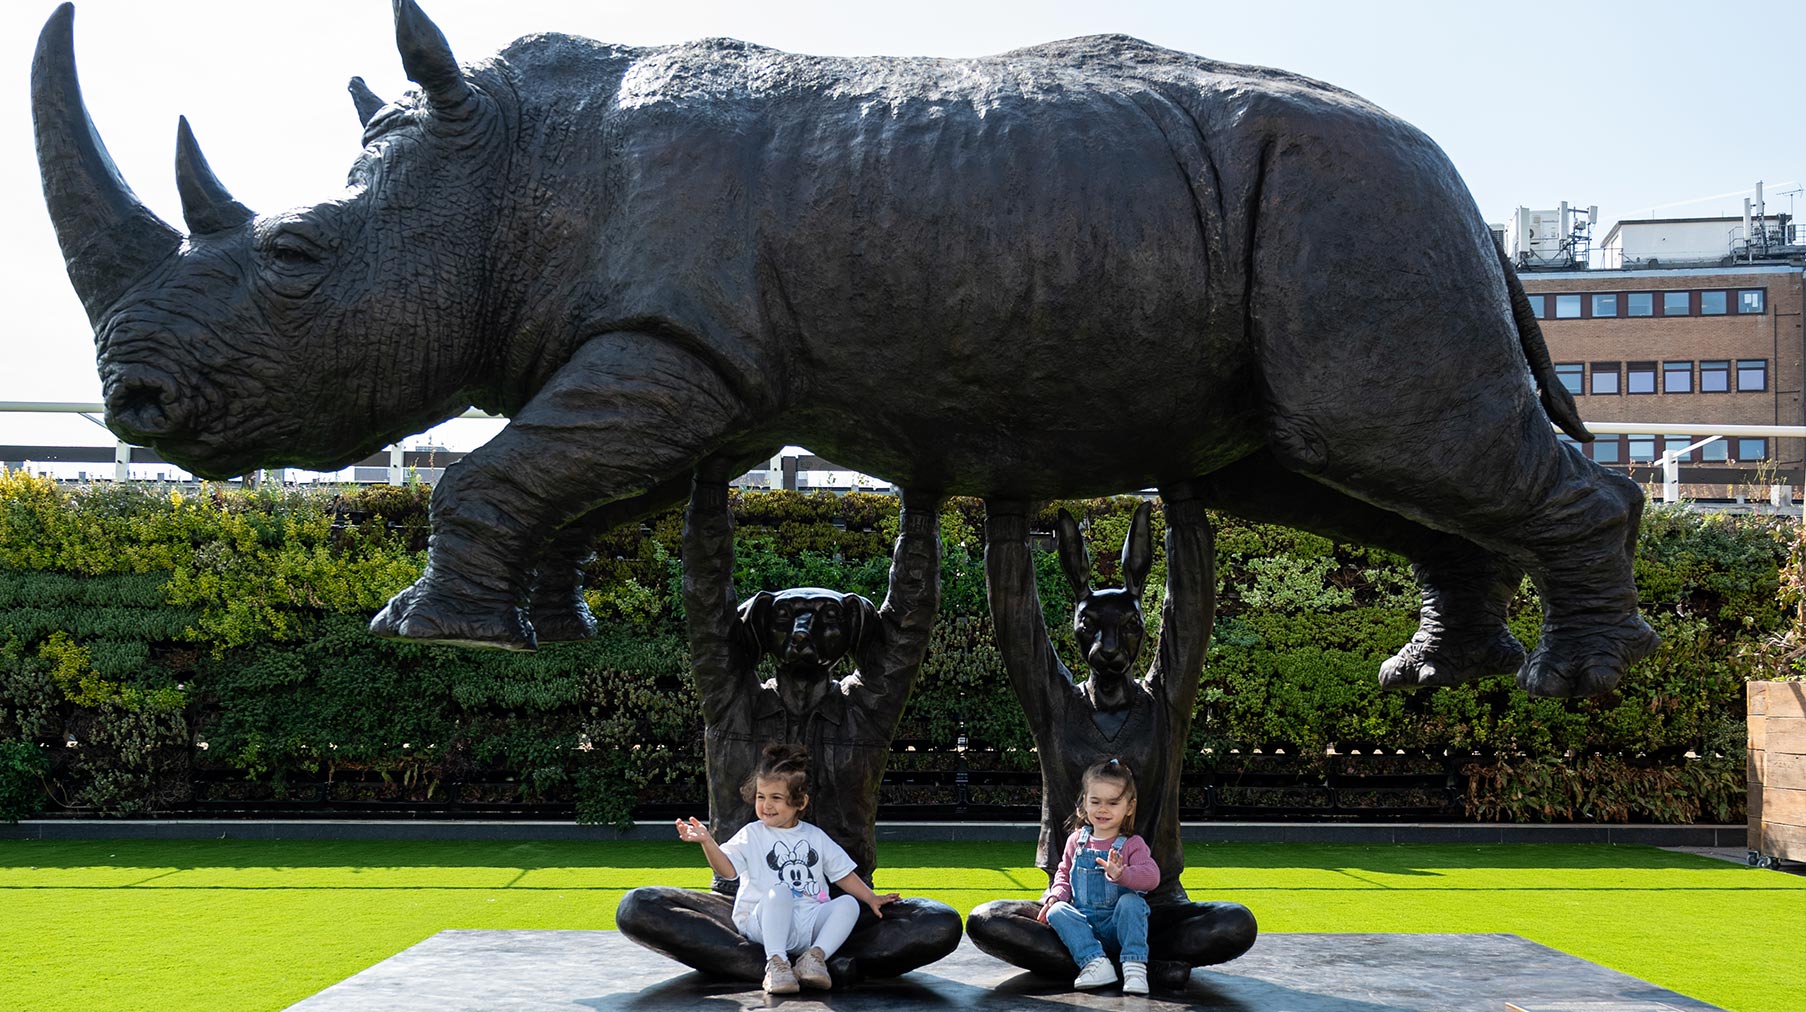 Westfield London on X: We rise by lifting others 🦏 Have you spotted the  newest addition to Westfield London yet? Help the rhino to rise up and show  your support for one